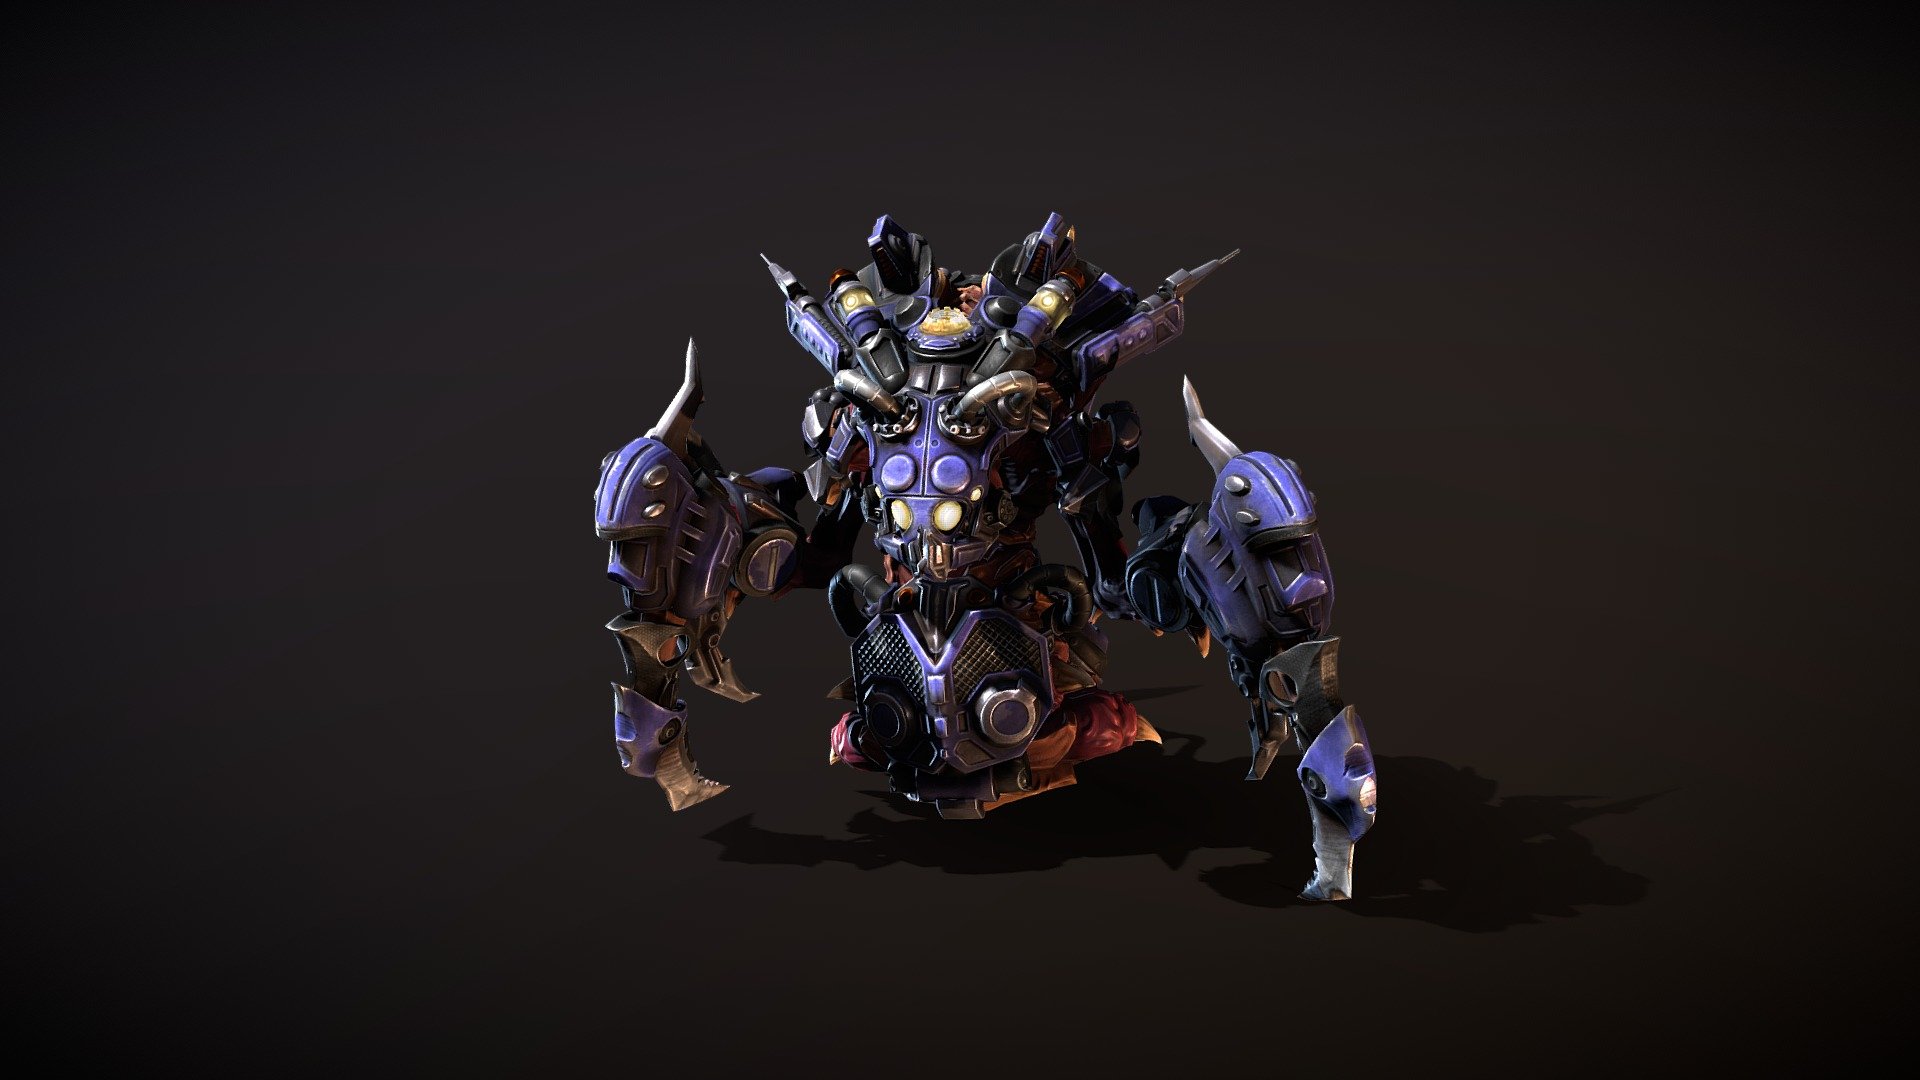 Human friendly beast was armored to improove it`s atacking and defensive abilities. Sharp blades, cooling systems and stimulators turned Terrg in to deadly space marine 3d model